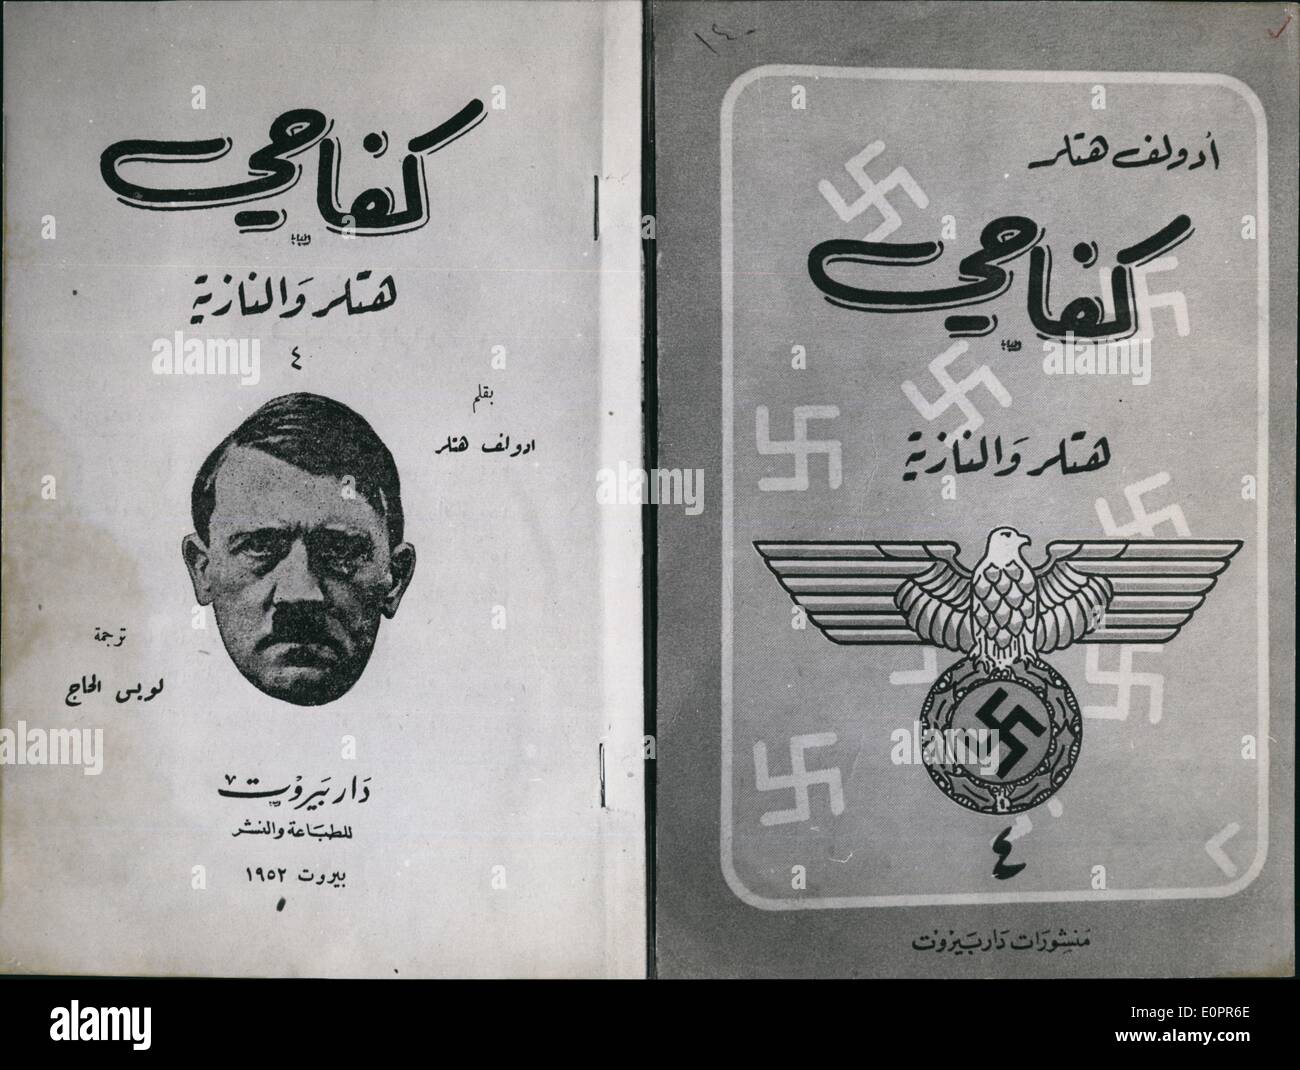 Nov. 11, 1956 - Surprise at the seizure: When the Israelish forces seized the first Egyptian soldiers they were astonished to find volumes of Hitlers Mein Kampf in a edition of nine volumes in the baggage of the captive Egyptian soldiers. The edition was in Arabian language and is thought to be printed in 1955. Photo shows the back of one of the volumes (left) and the front side of the 1955 Arabian edition of Adolf Hitlers ''Mein Kampf'' (on the right) Stock Photo